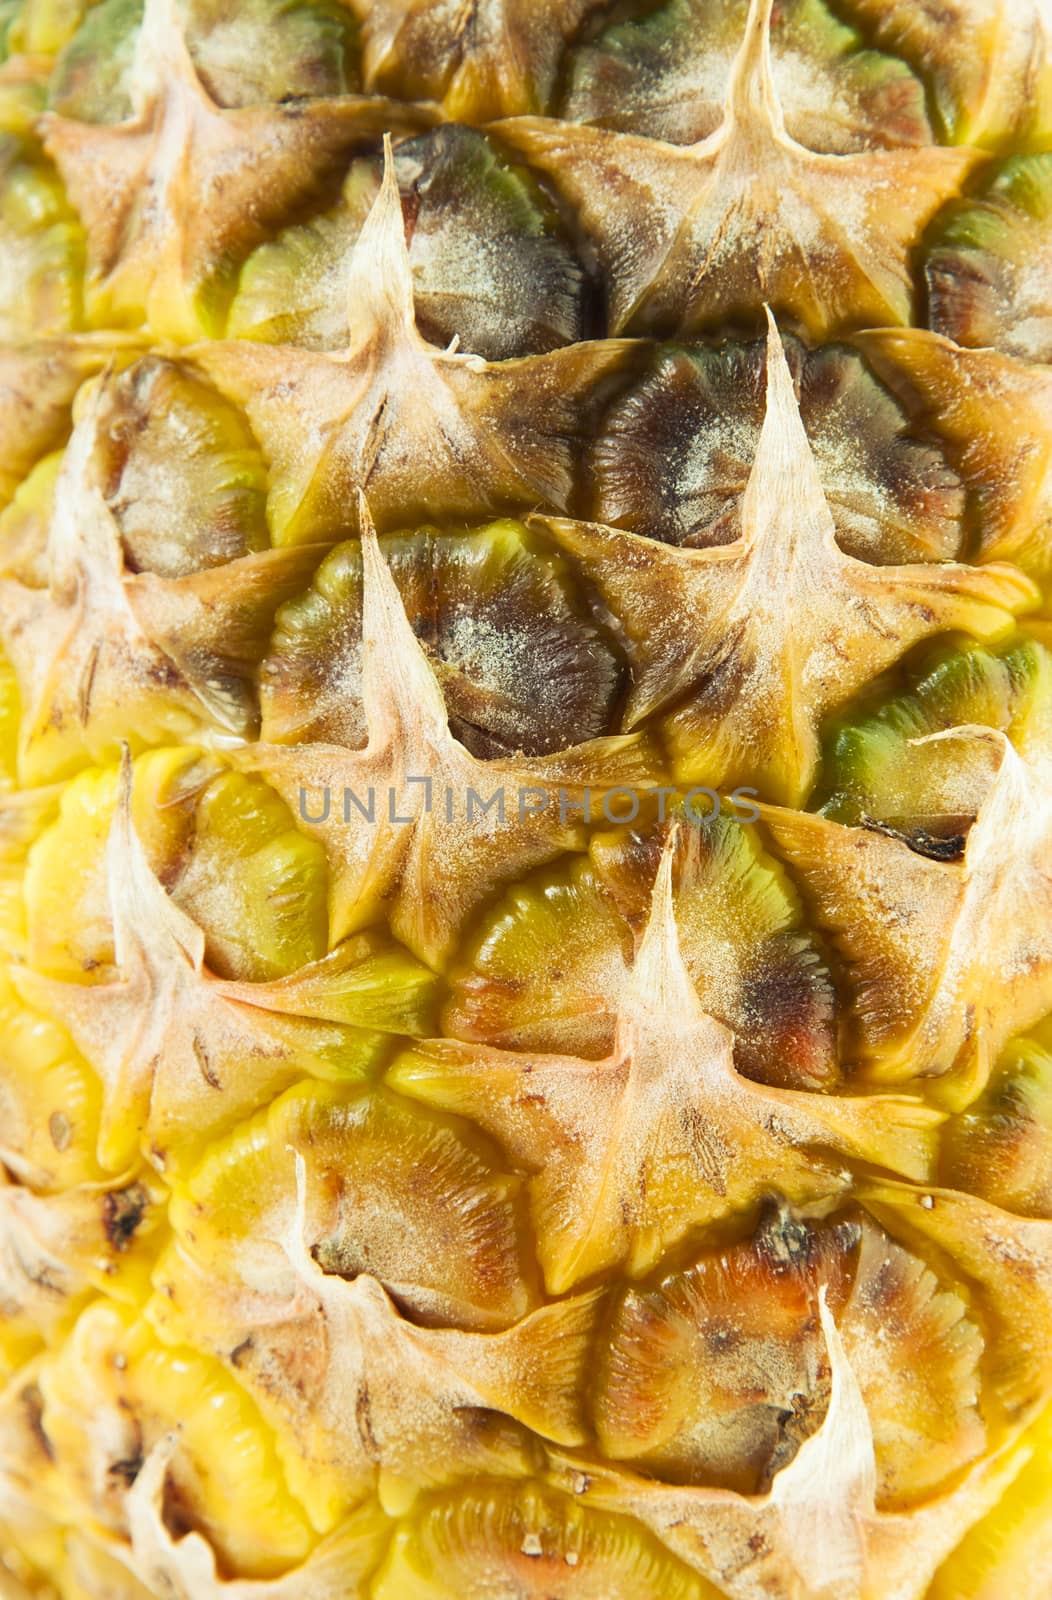  the peel of pineapple photographed by a close up. small depth of sharpness